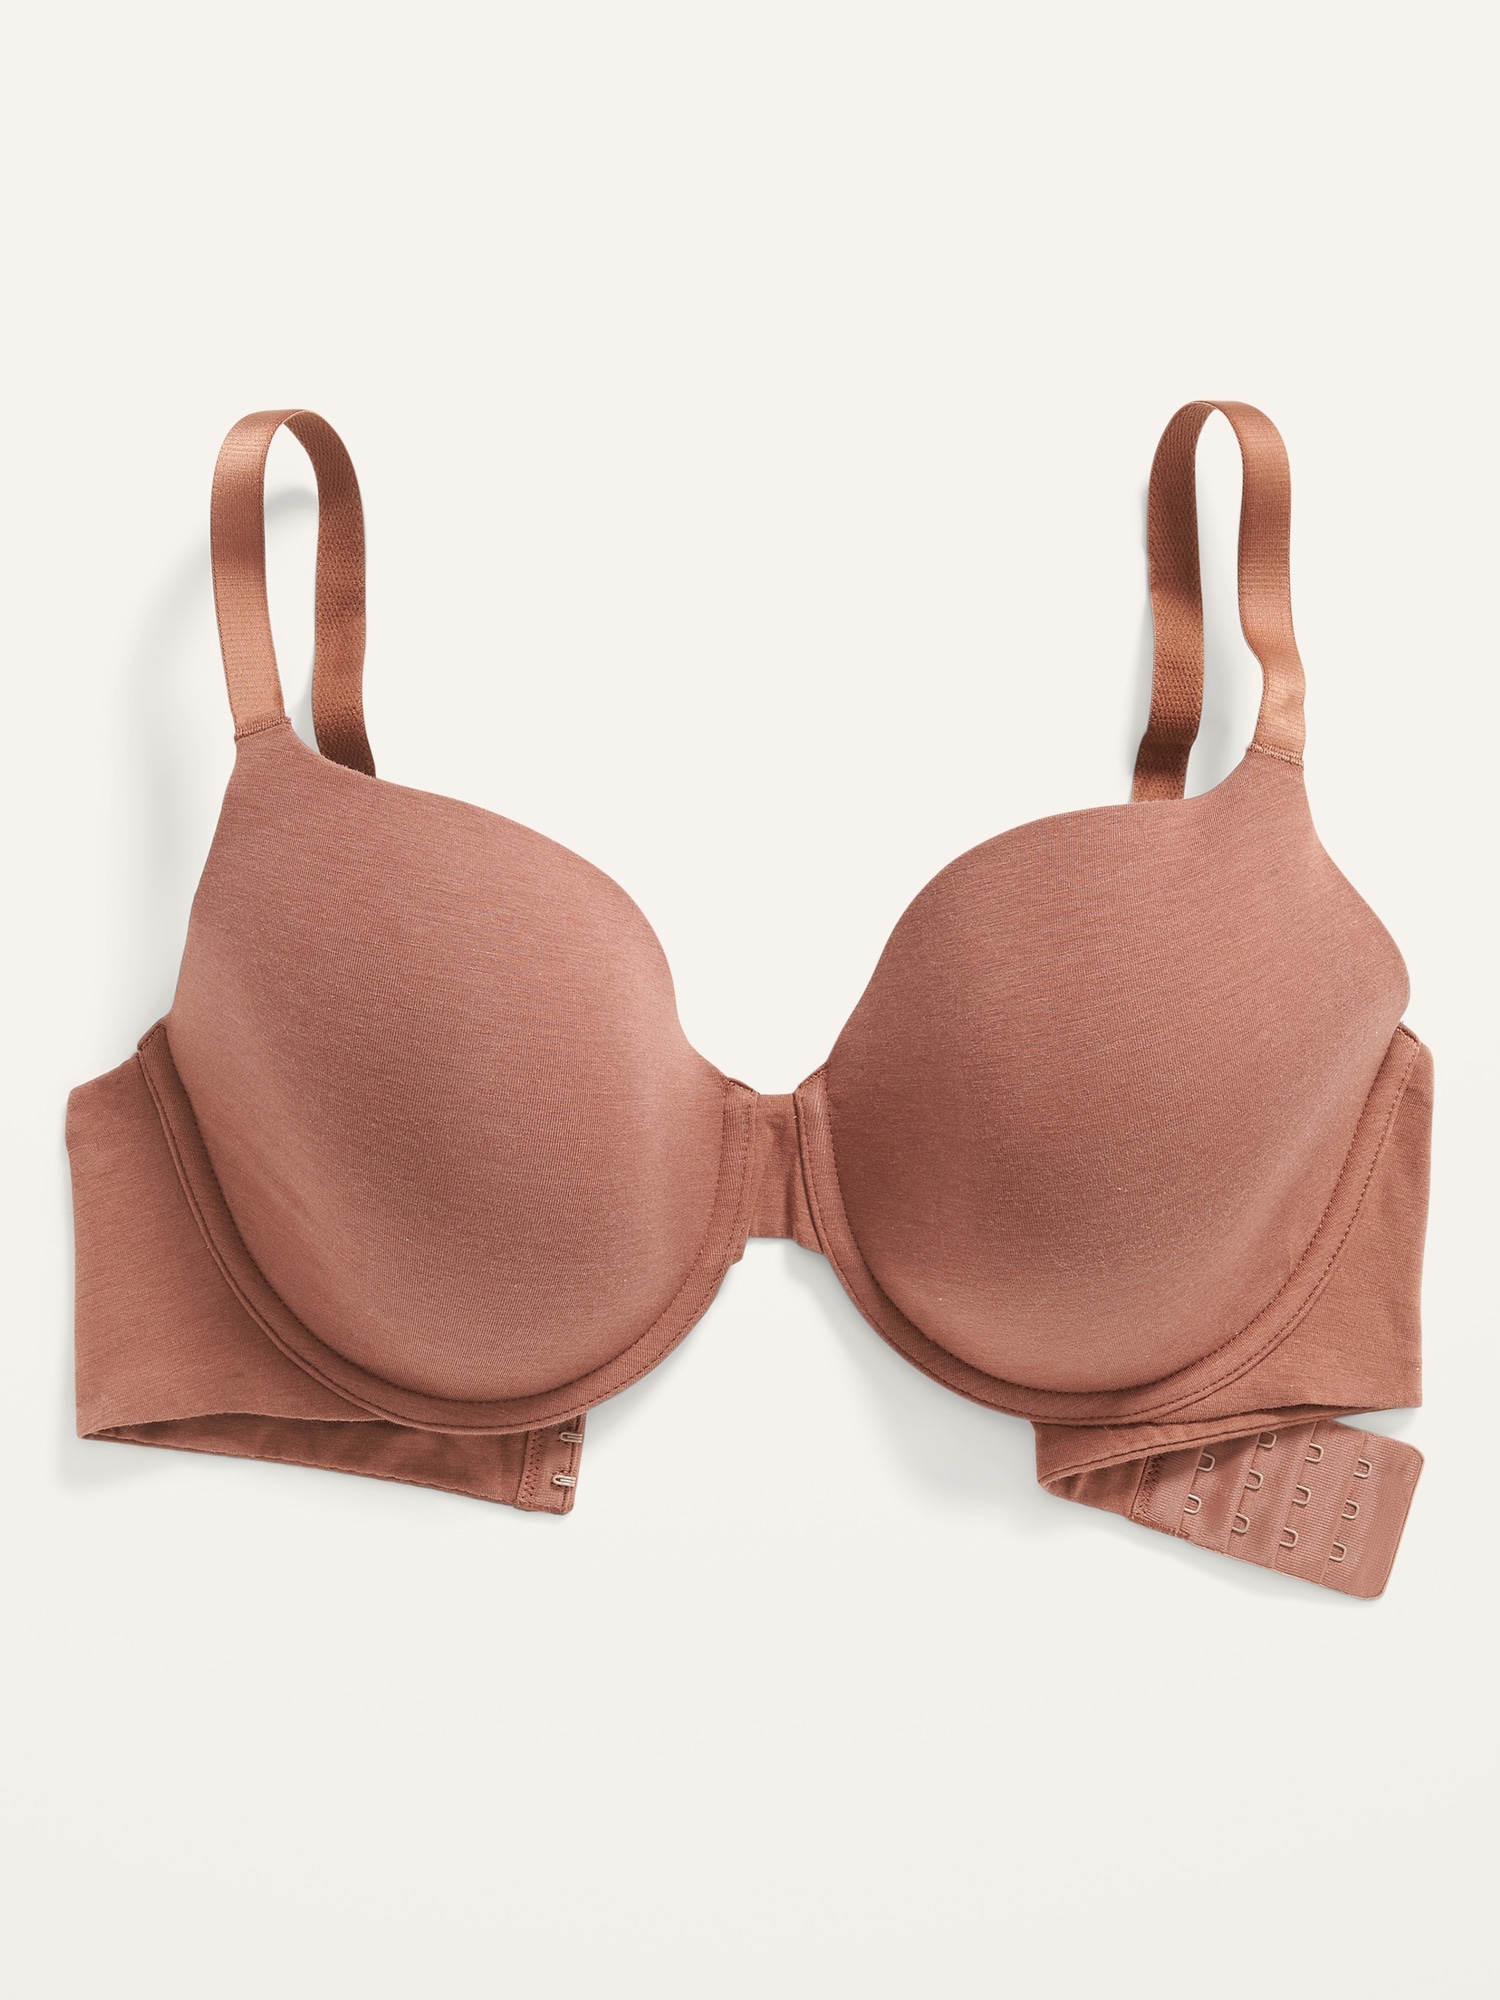 Maternity High Support Hands-Free Pumping Bra - Old Navy Philippines